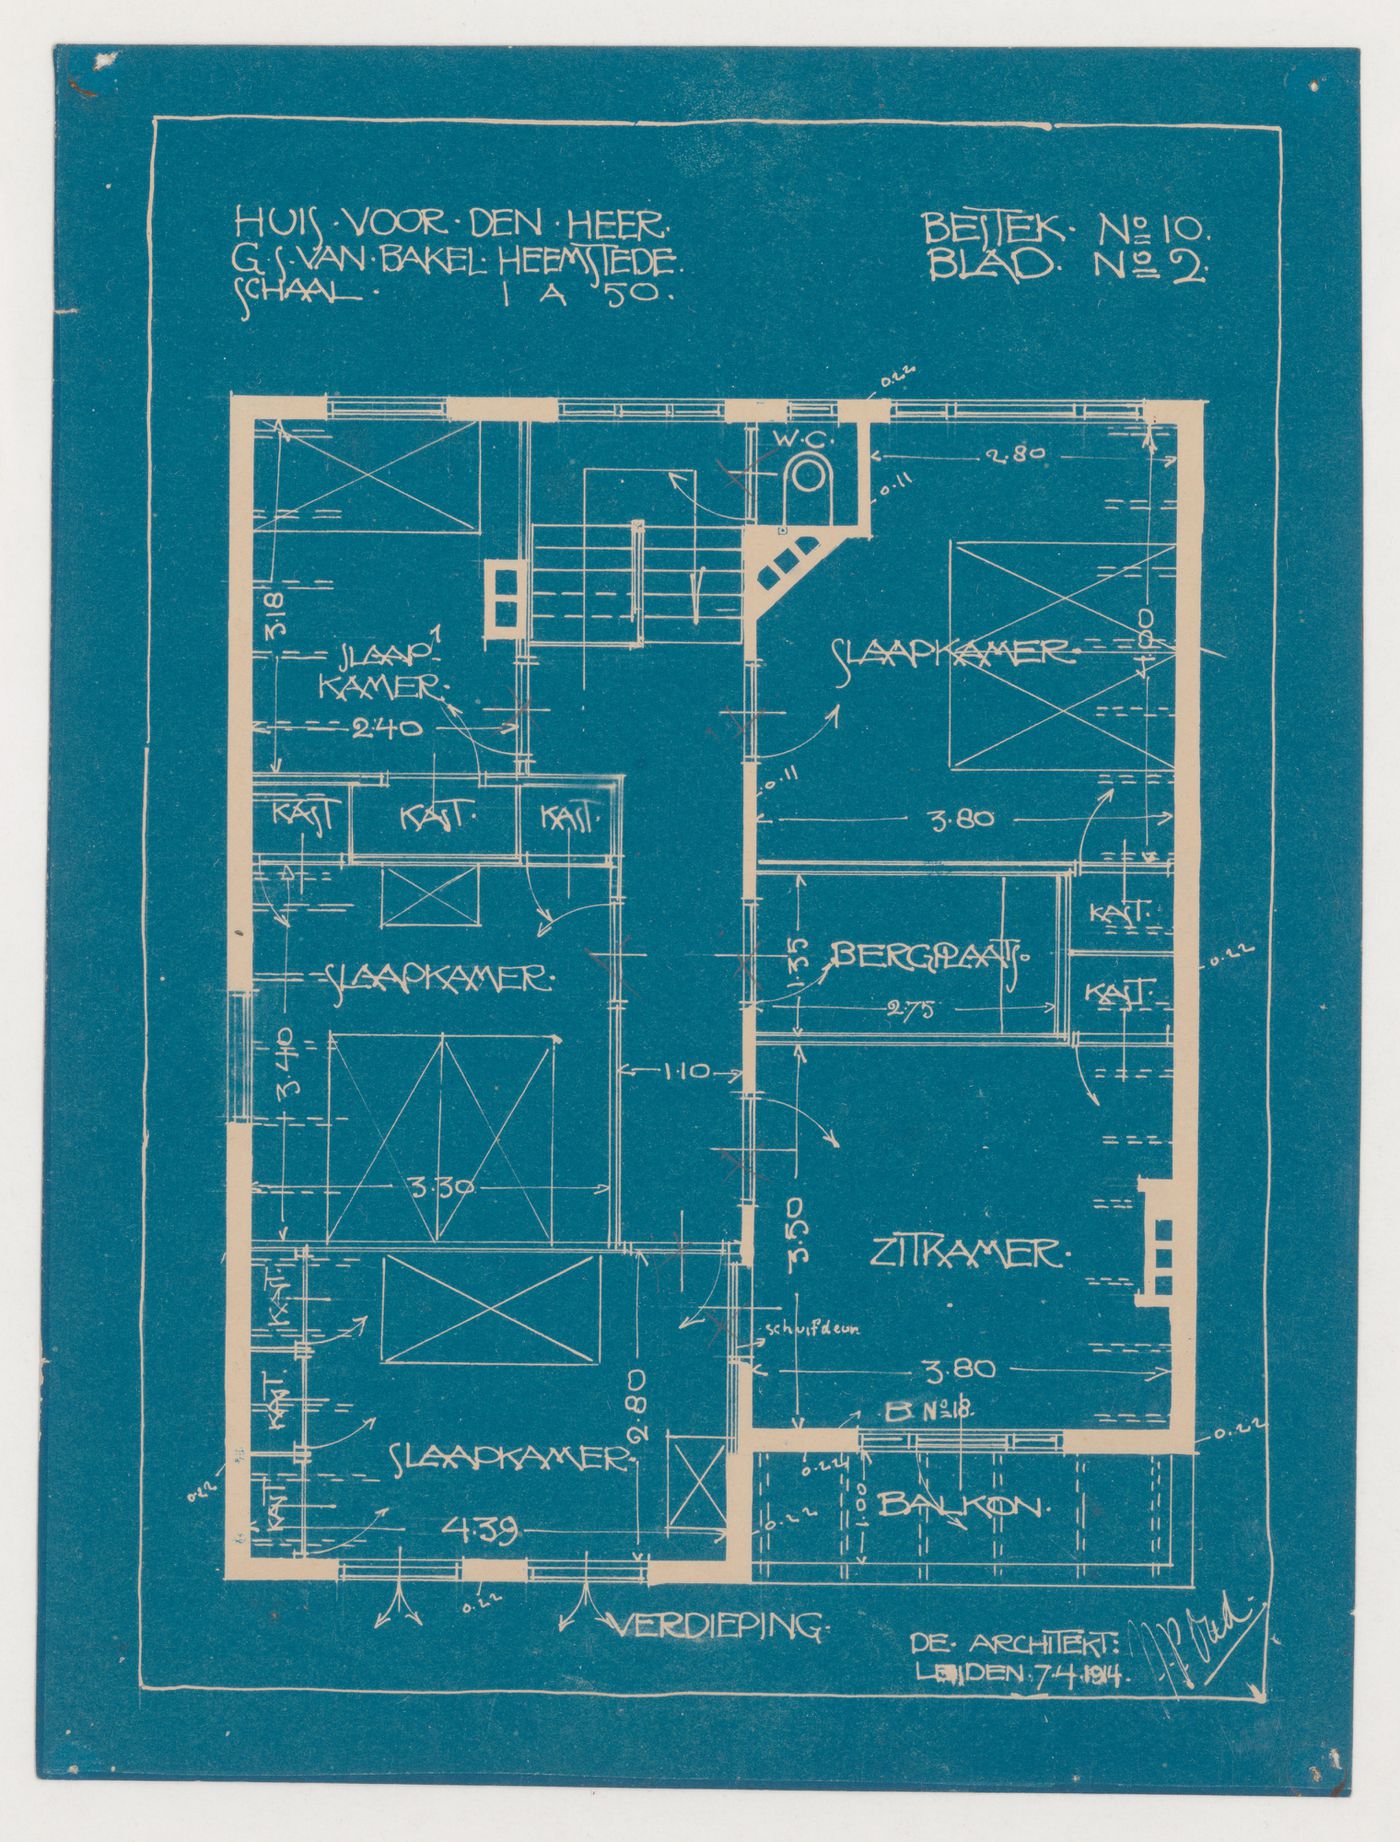 First floor plan for a house and shop with a rectangular plan for Mr. G.S. van Bakel, Heemstede, Netherlands